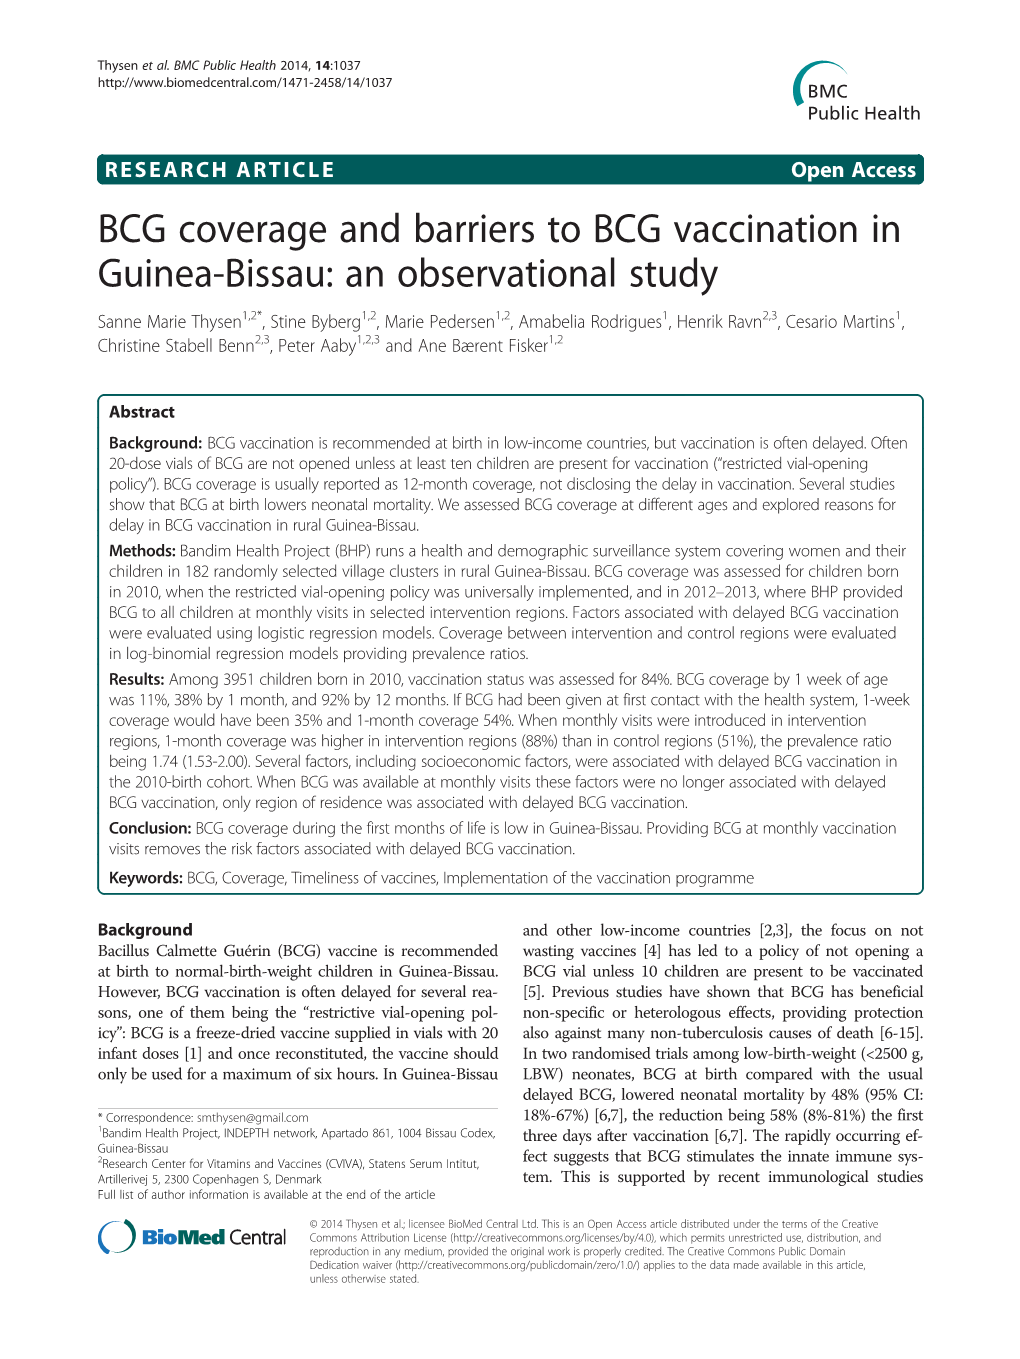 BCG Coverage and Barriers to BCG Vaccination In